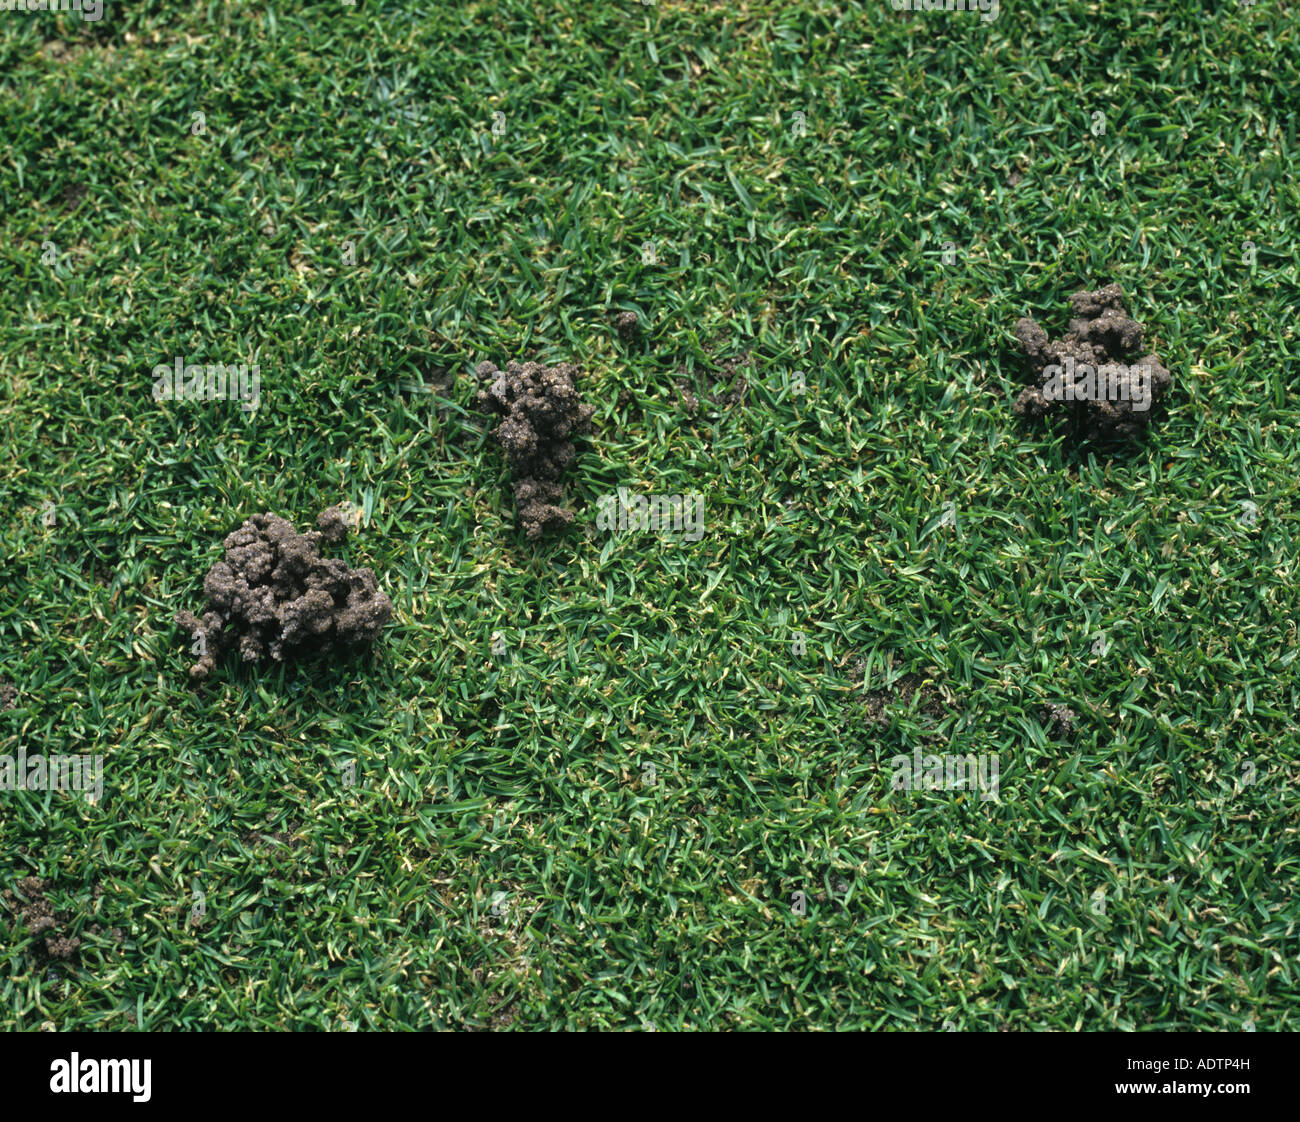 Worm casts in fine bowling green turf grass Stock Photo